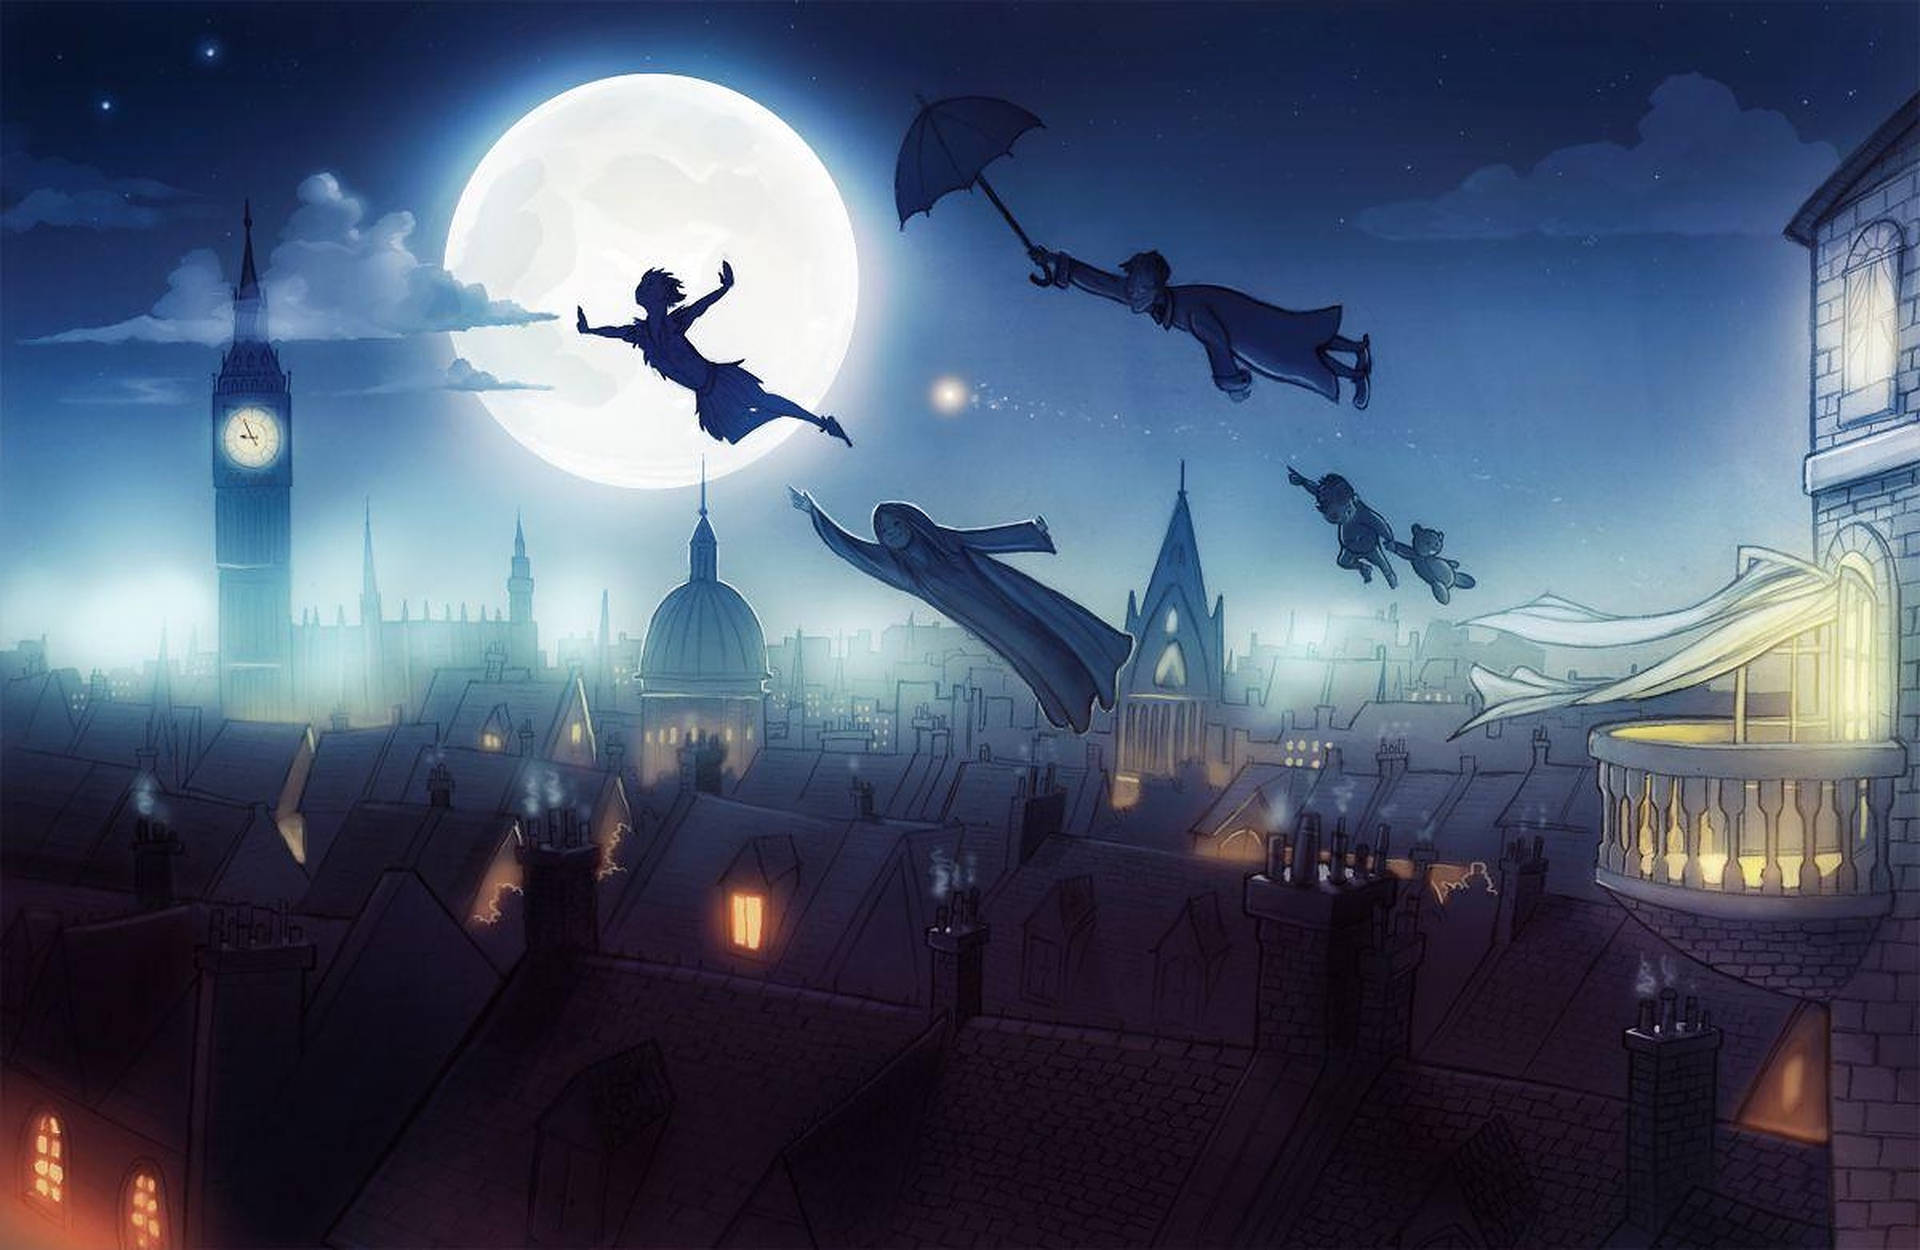 Peter Pan Flying To Neverland Background